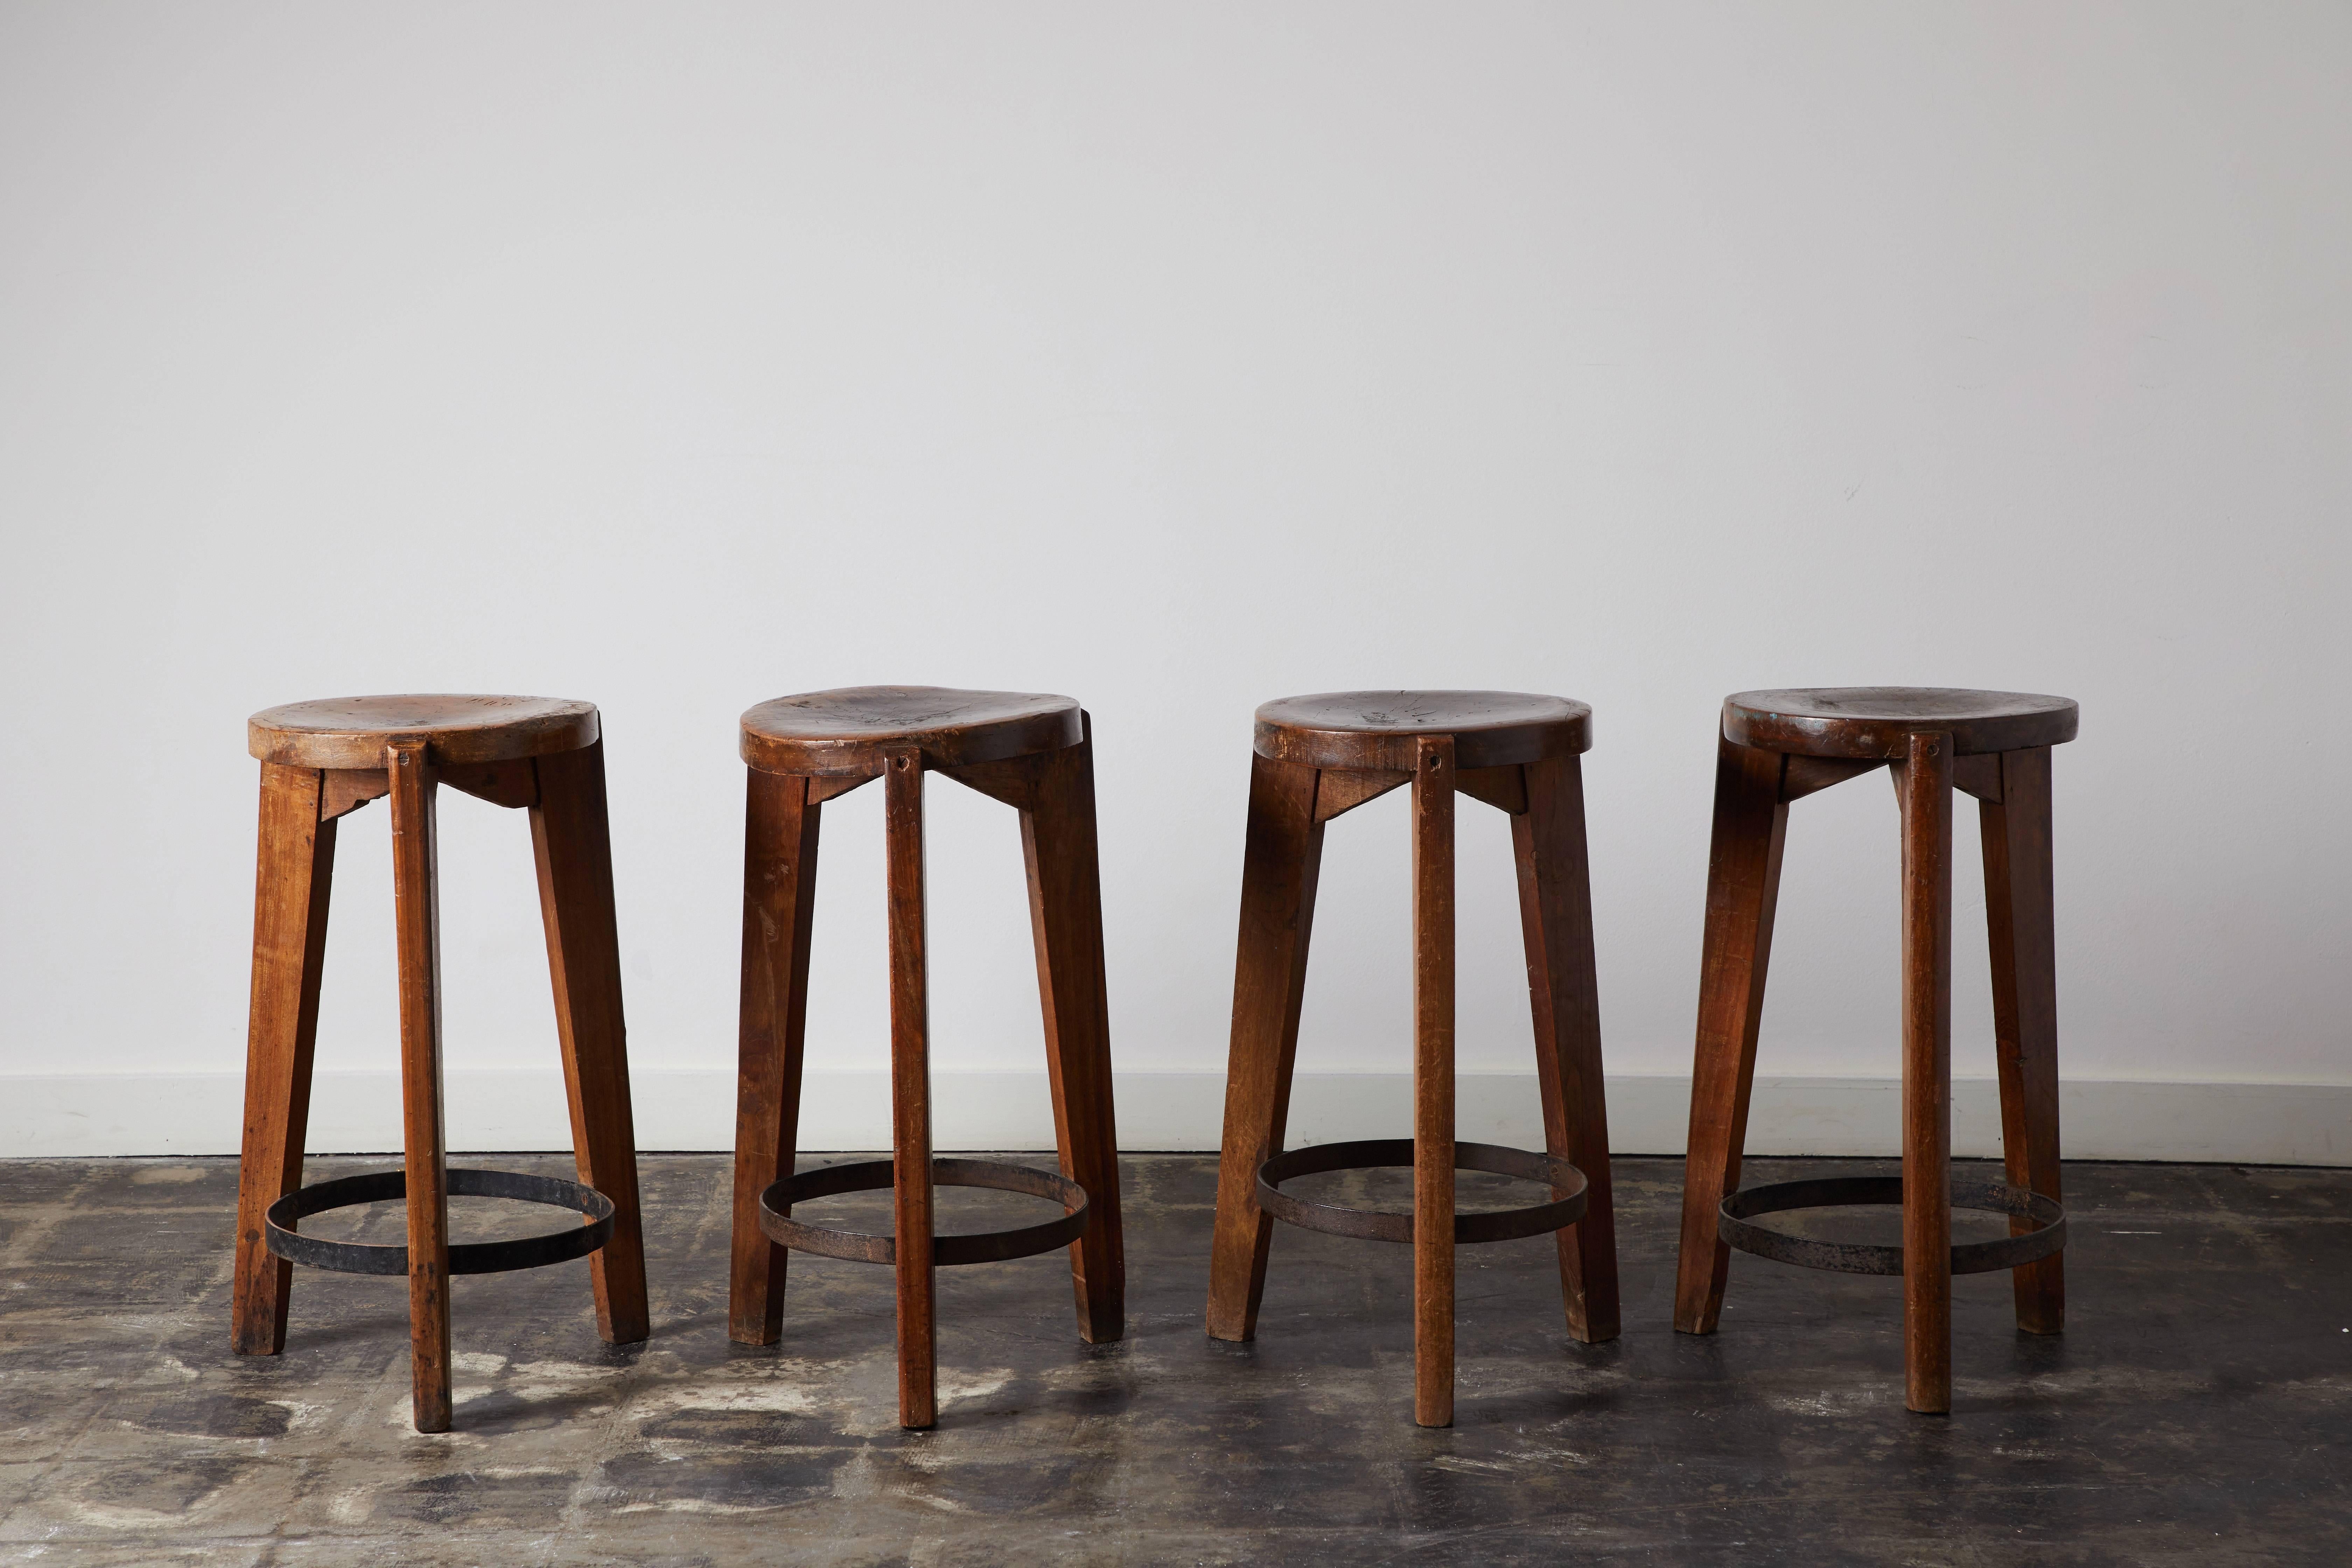 Mid-20th Century Set of Four Stools by Pierre Jeanneret for Punjab University in Chandigarh